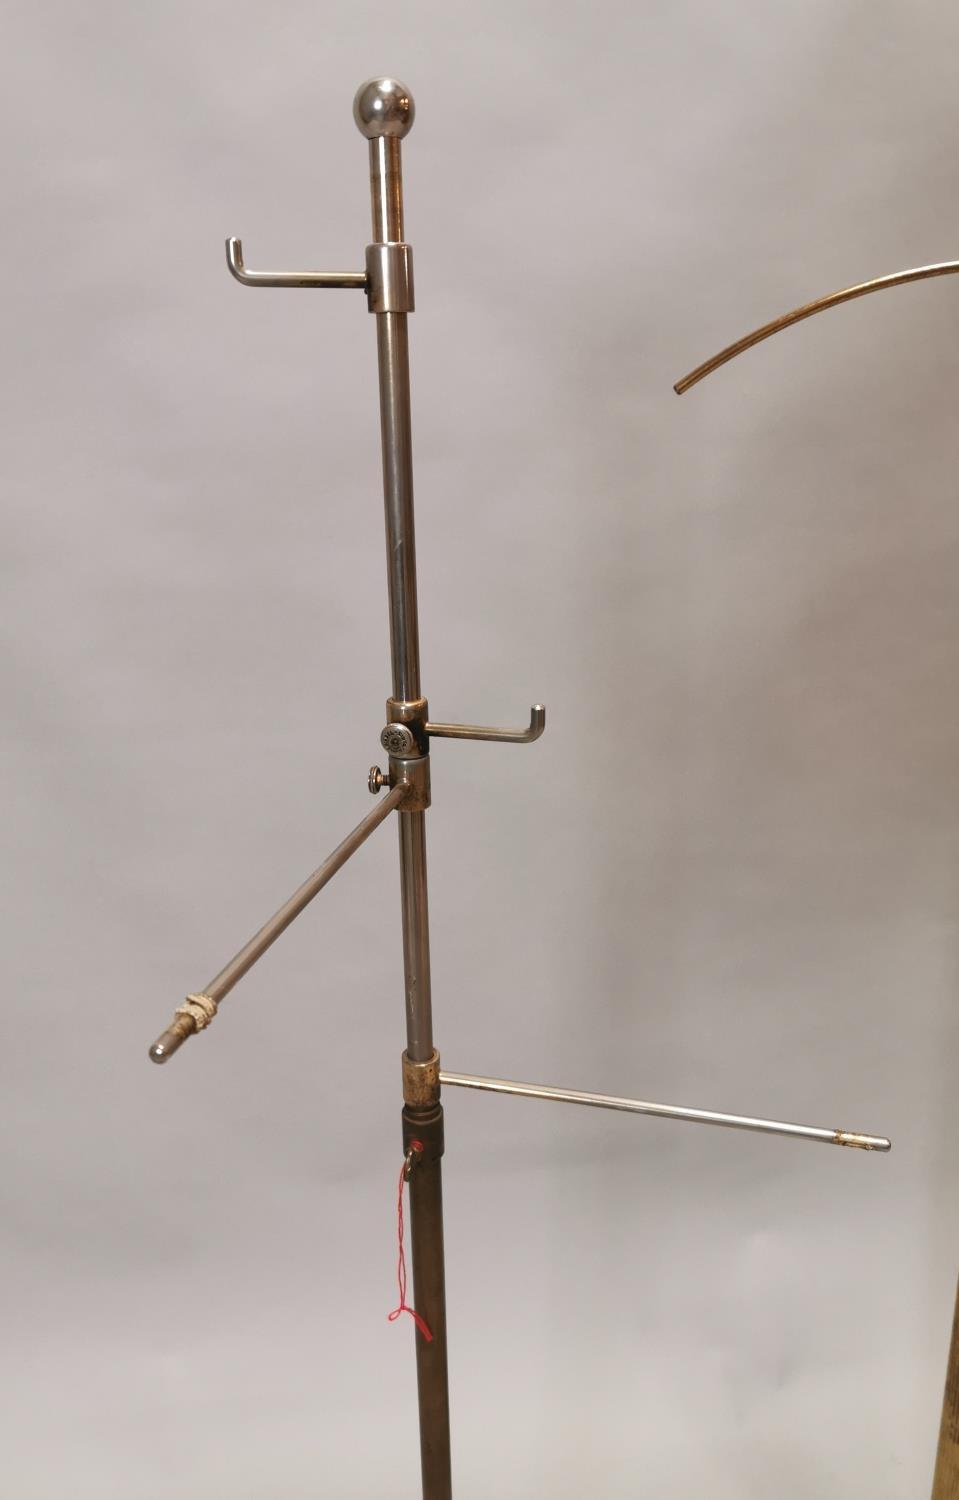 Two early 20th C. brass haberdashery shop hat stands - Image 8 of 8